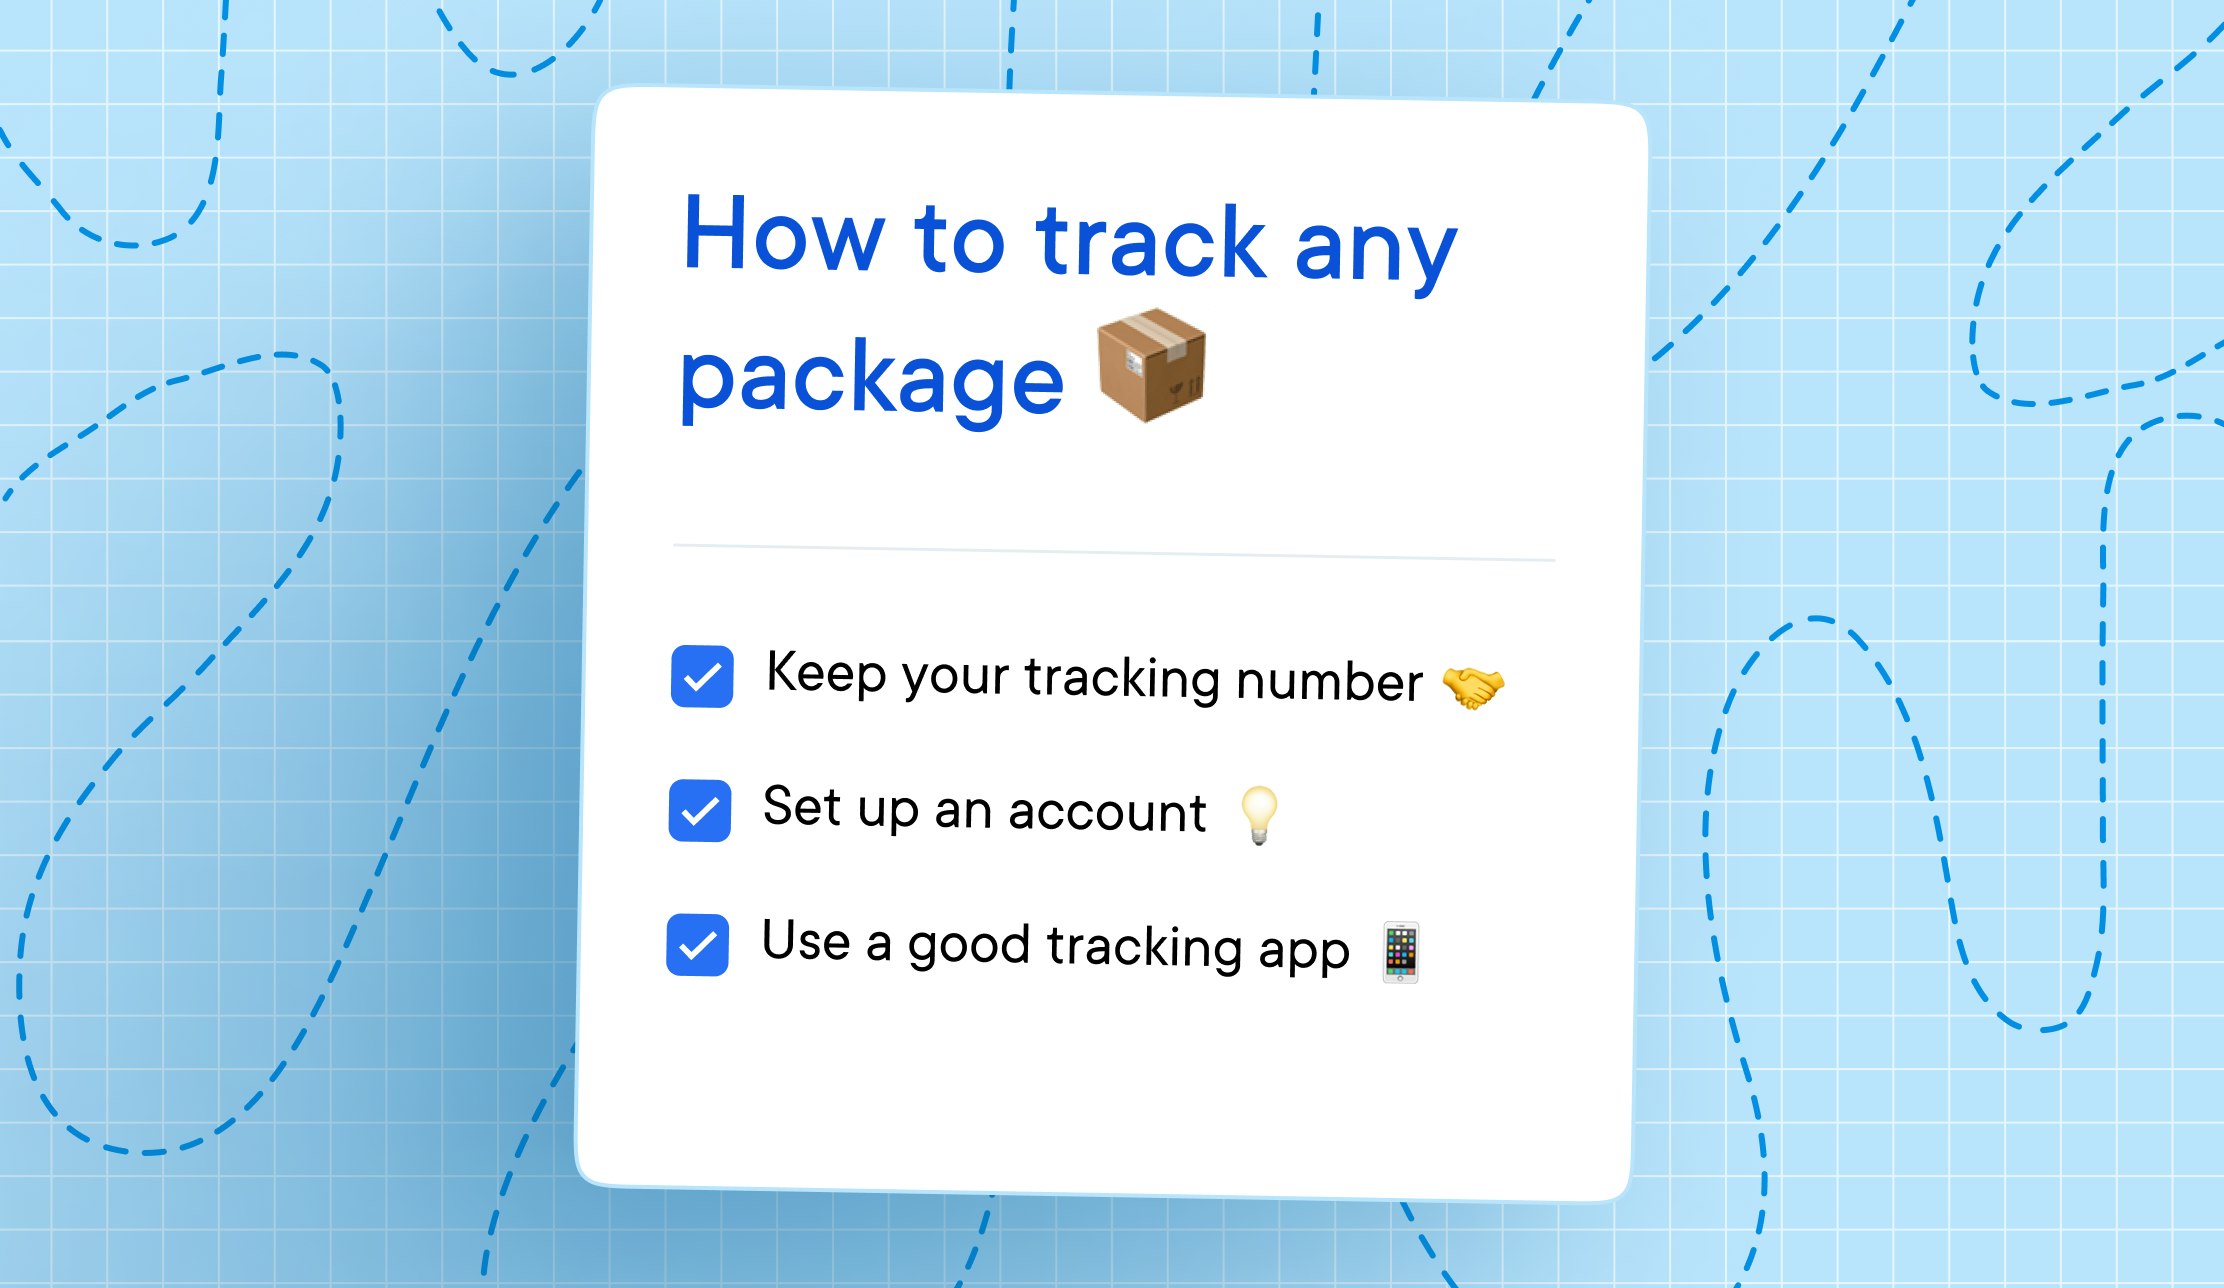 How to track any package; keep your tracking number, set up an account, use a good package tracking app